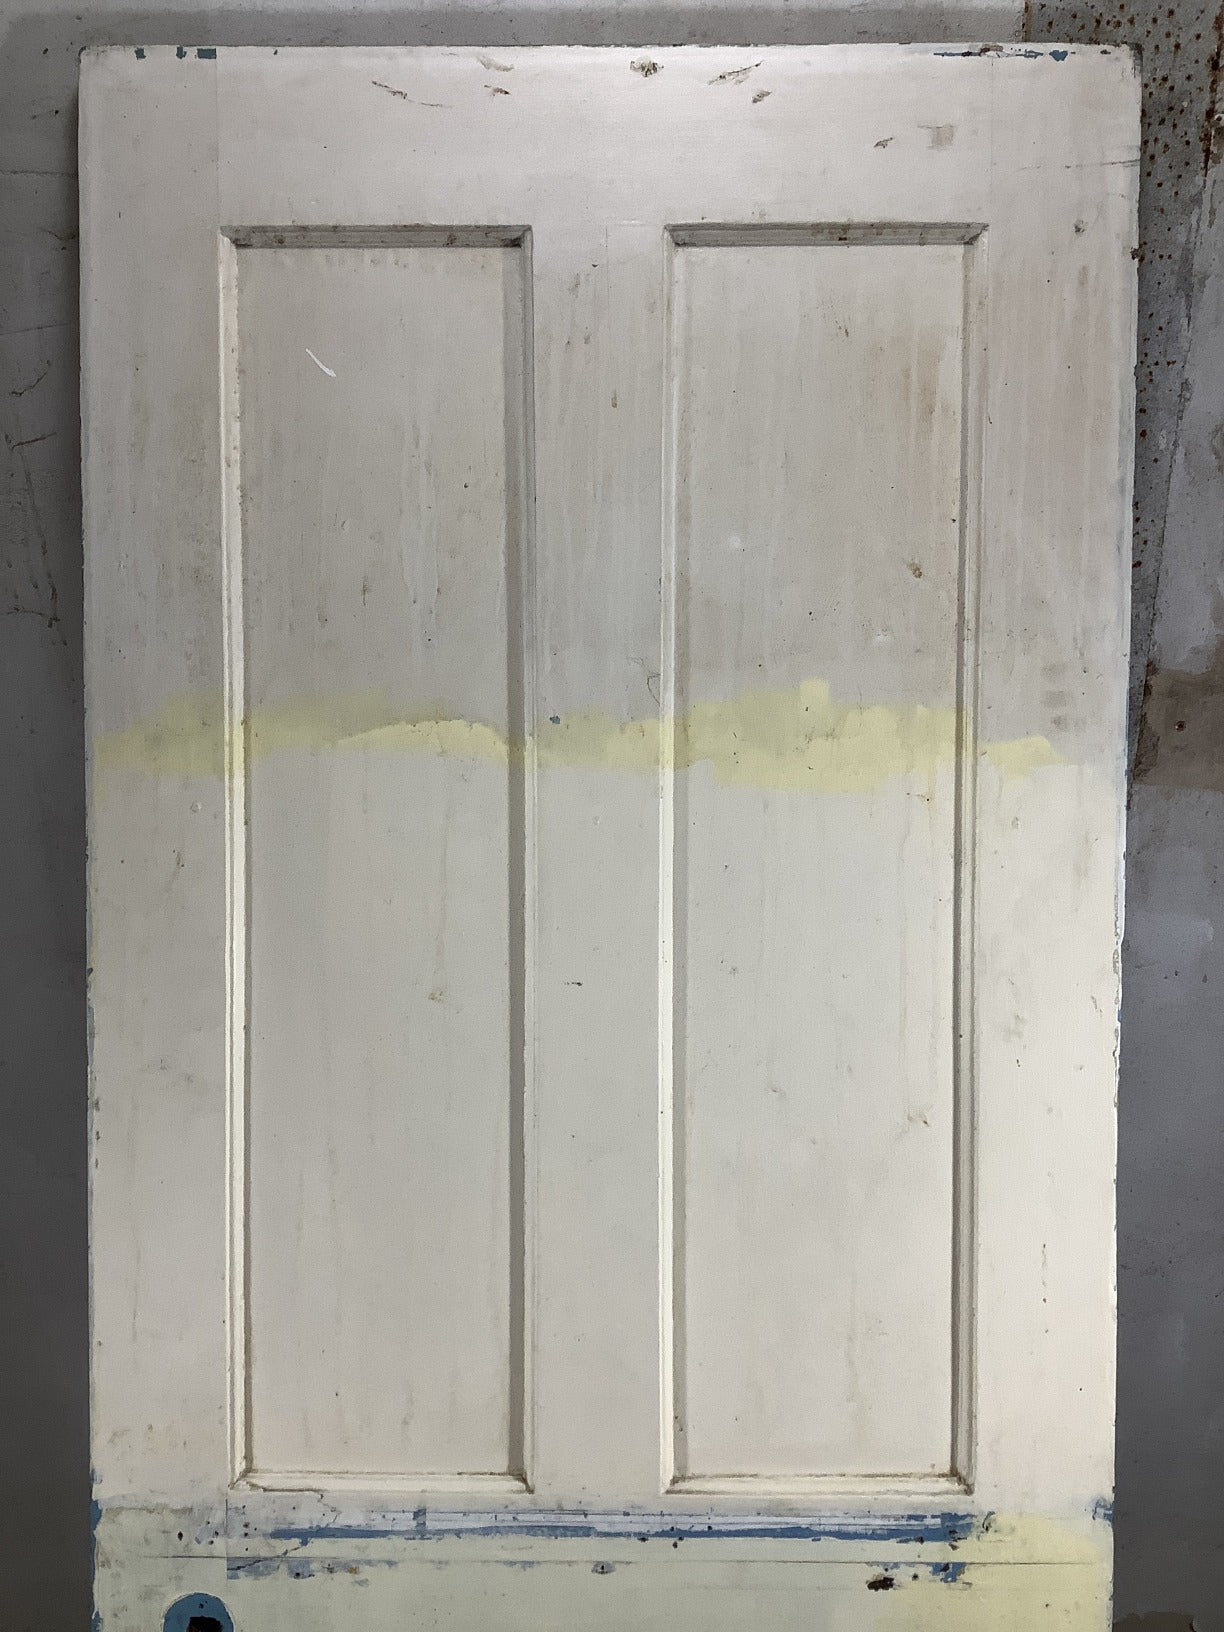 29 5/8"X76 3/4" 1930s Internal Painted Pitch Pine Four Panel Door 2over2 Old